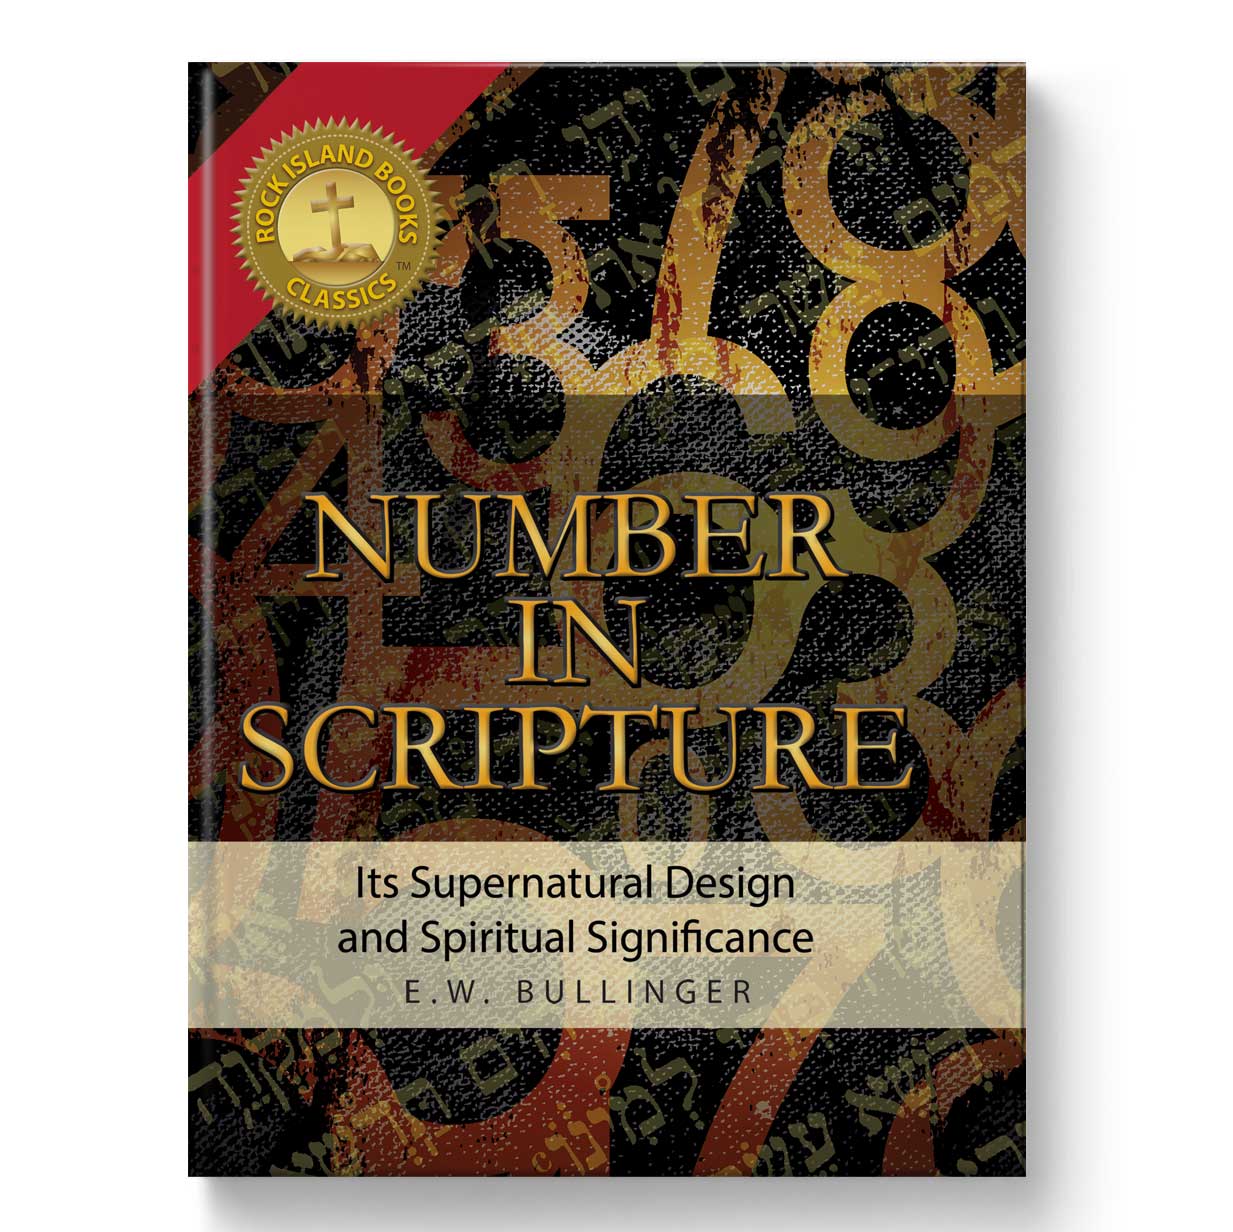 Number In Scripture: Its Supernatural Design and Spiritual Significance